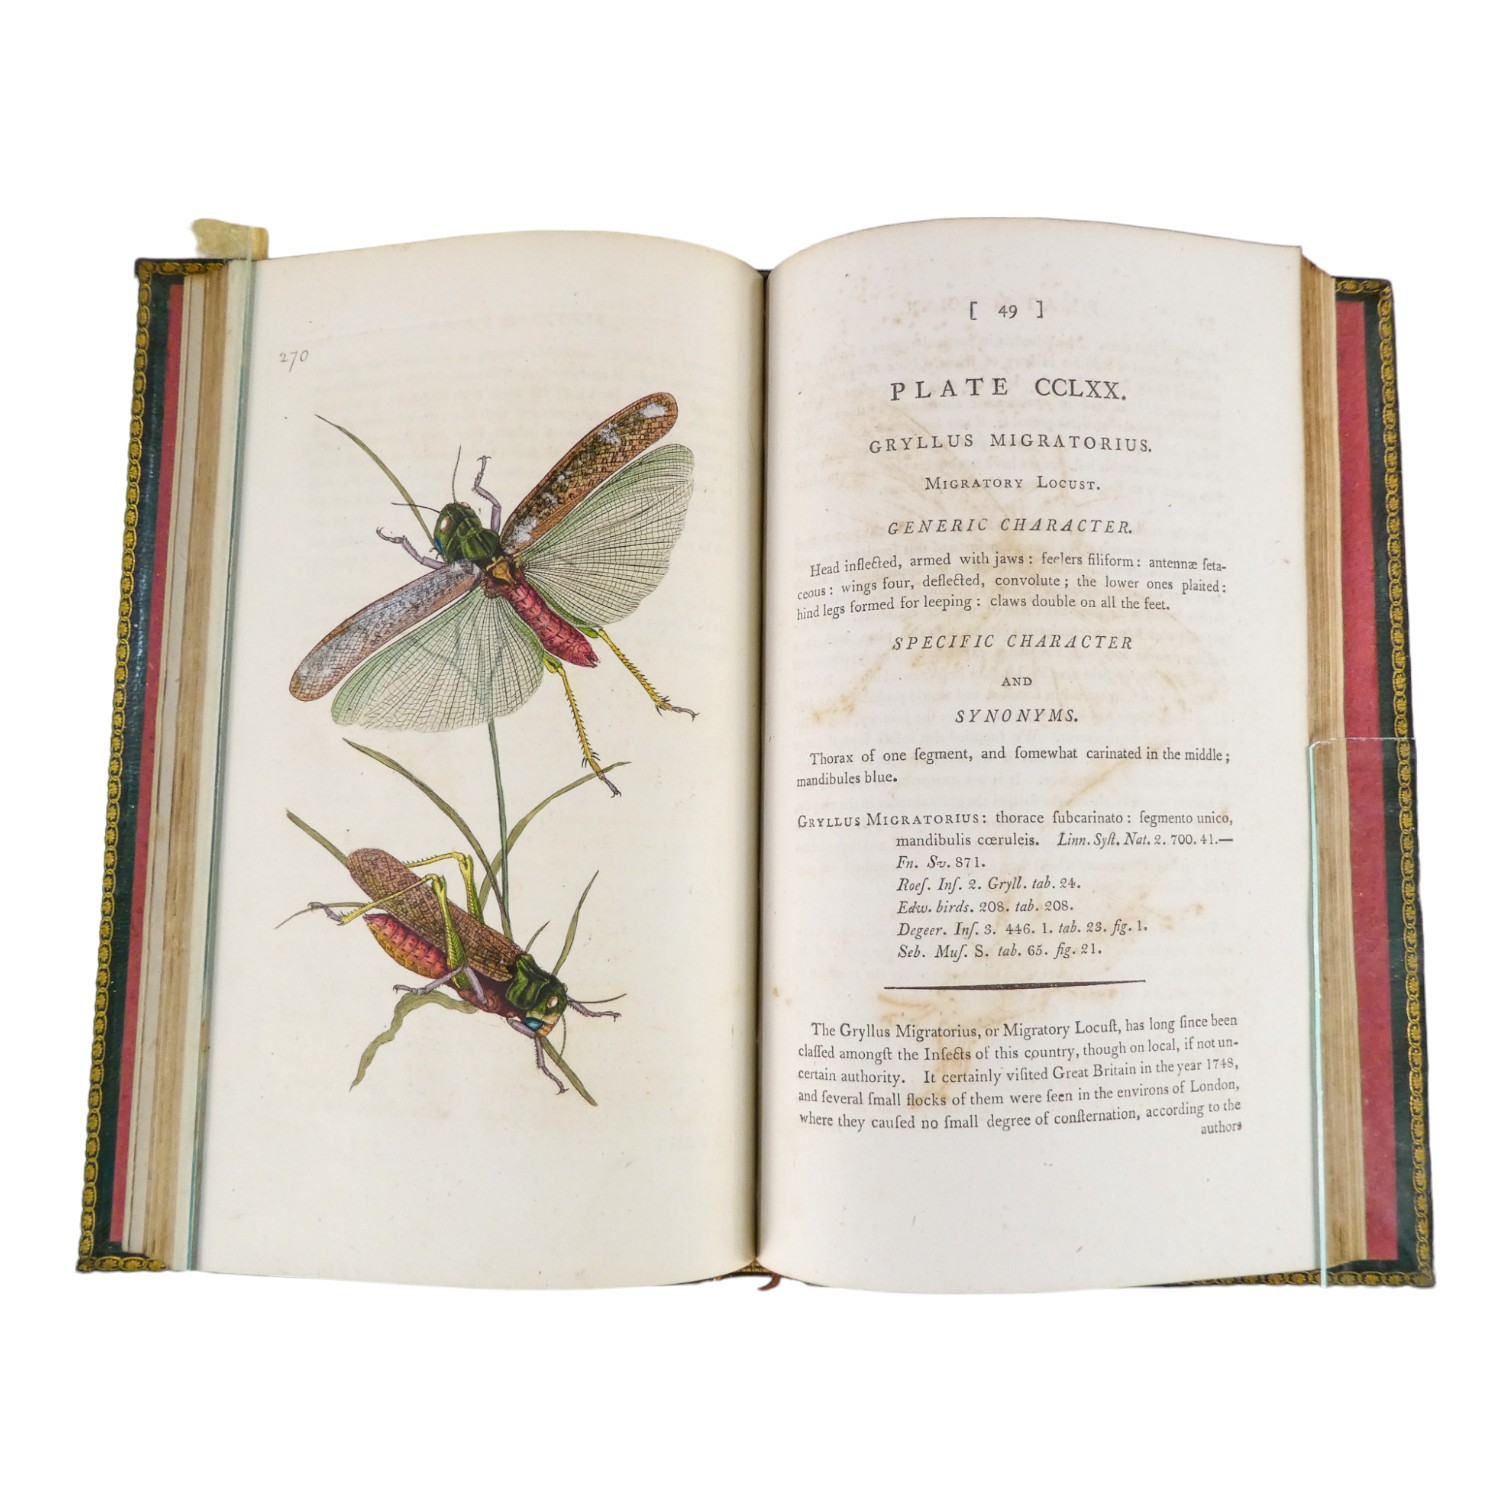 DONOVAN Edward, The Natural History of British Insects ... - published F & C Rivington 62 St Paul' - Image 19 of 33